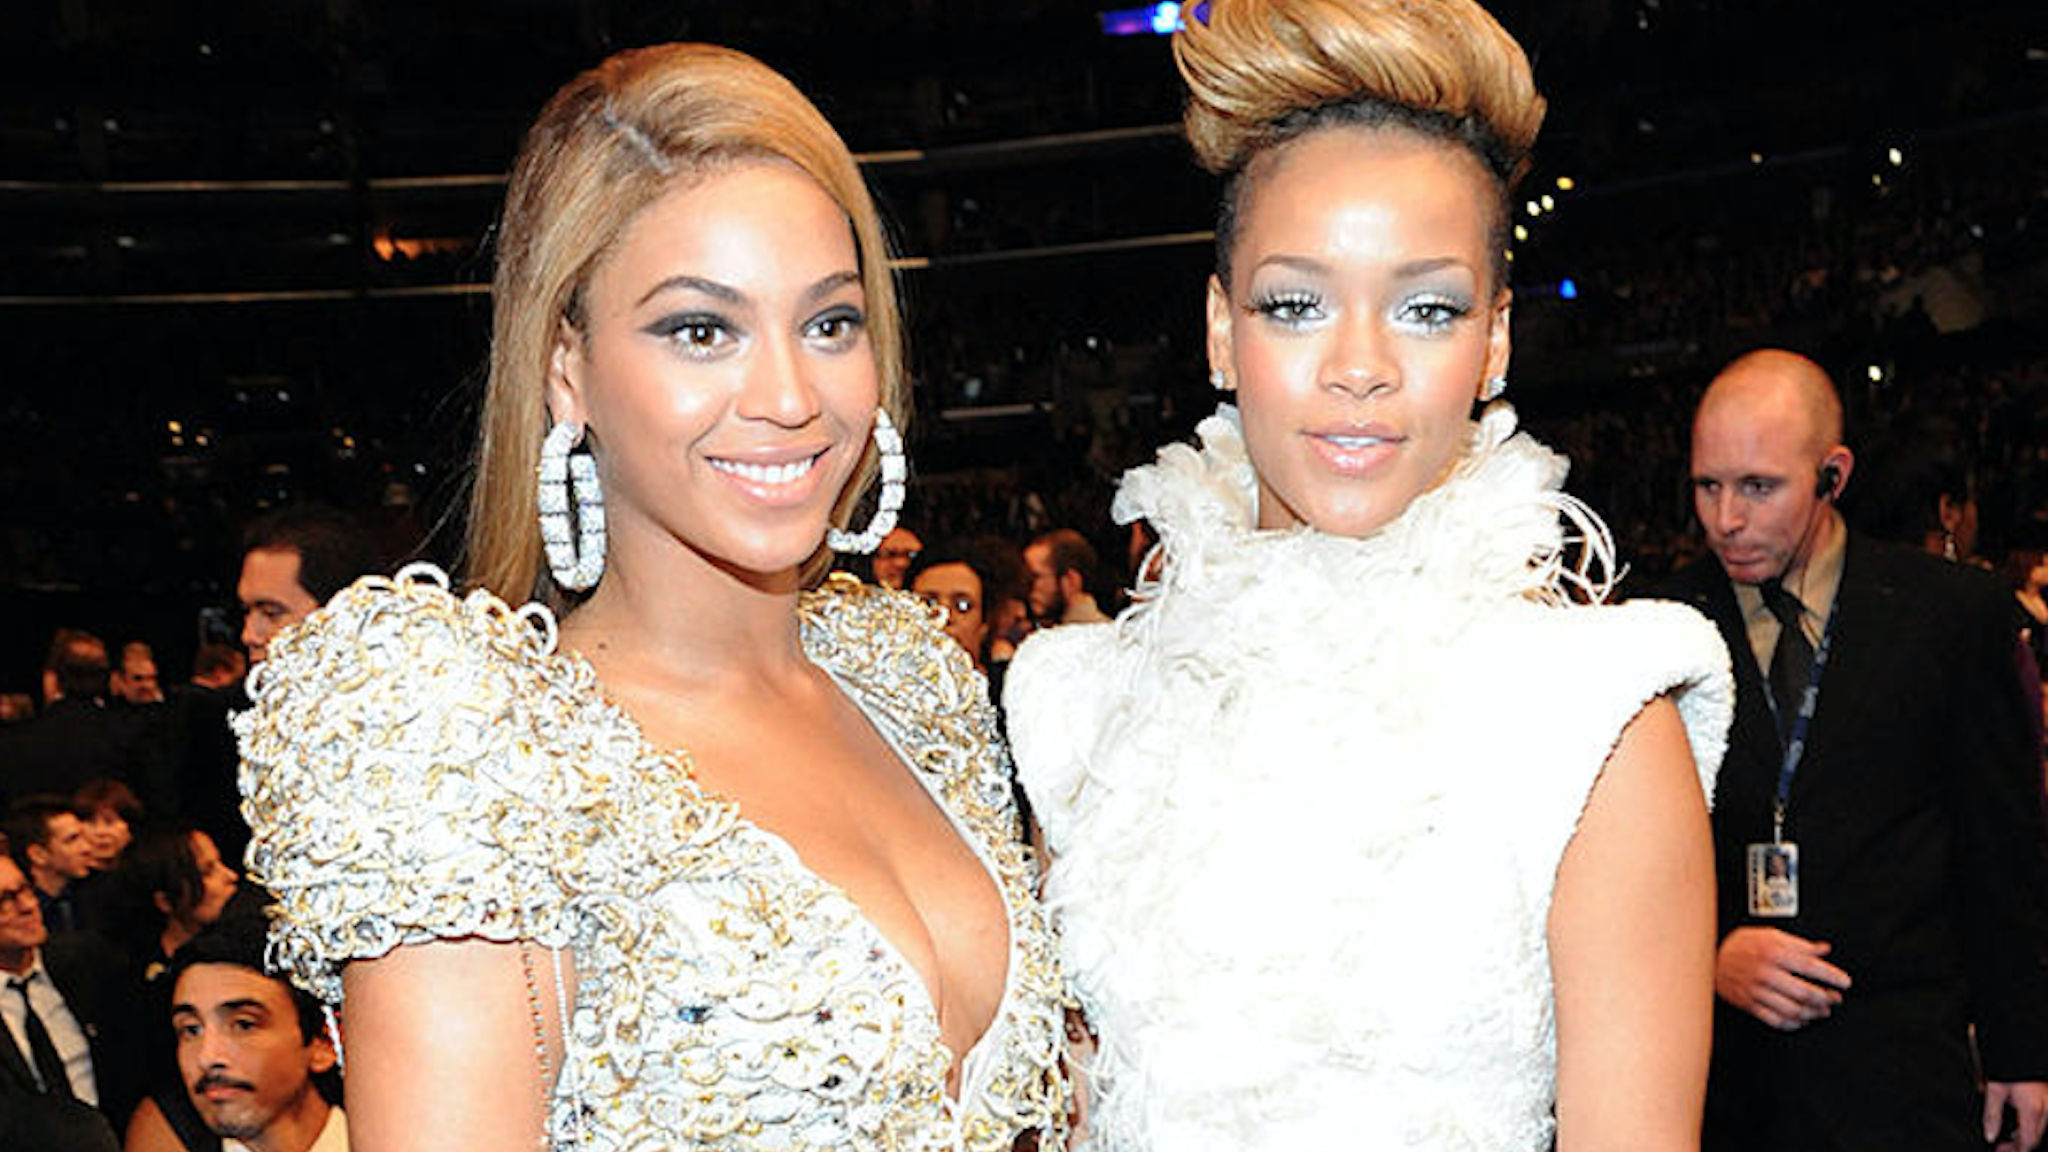 Beyonce and Rihanna attend the 52nd Annual GRAMMY Awards held at Staples Center on January 31, 2010 in Los Angeles, California.